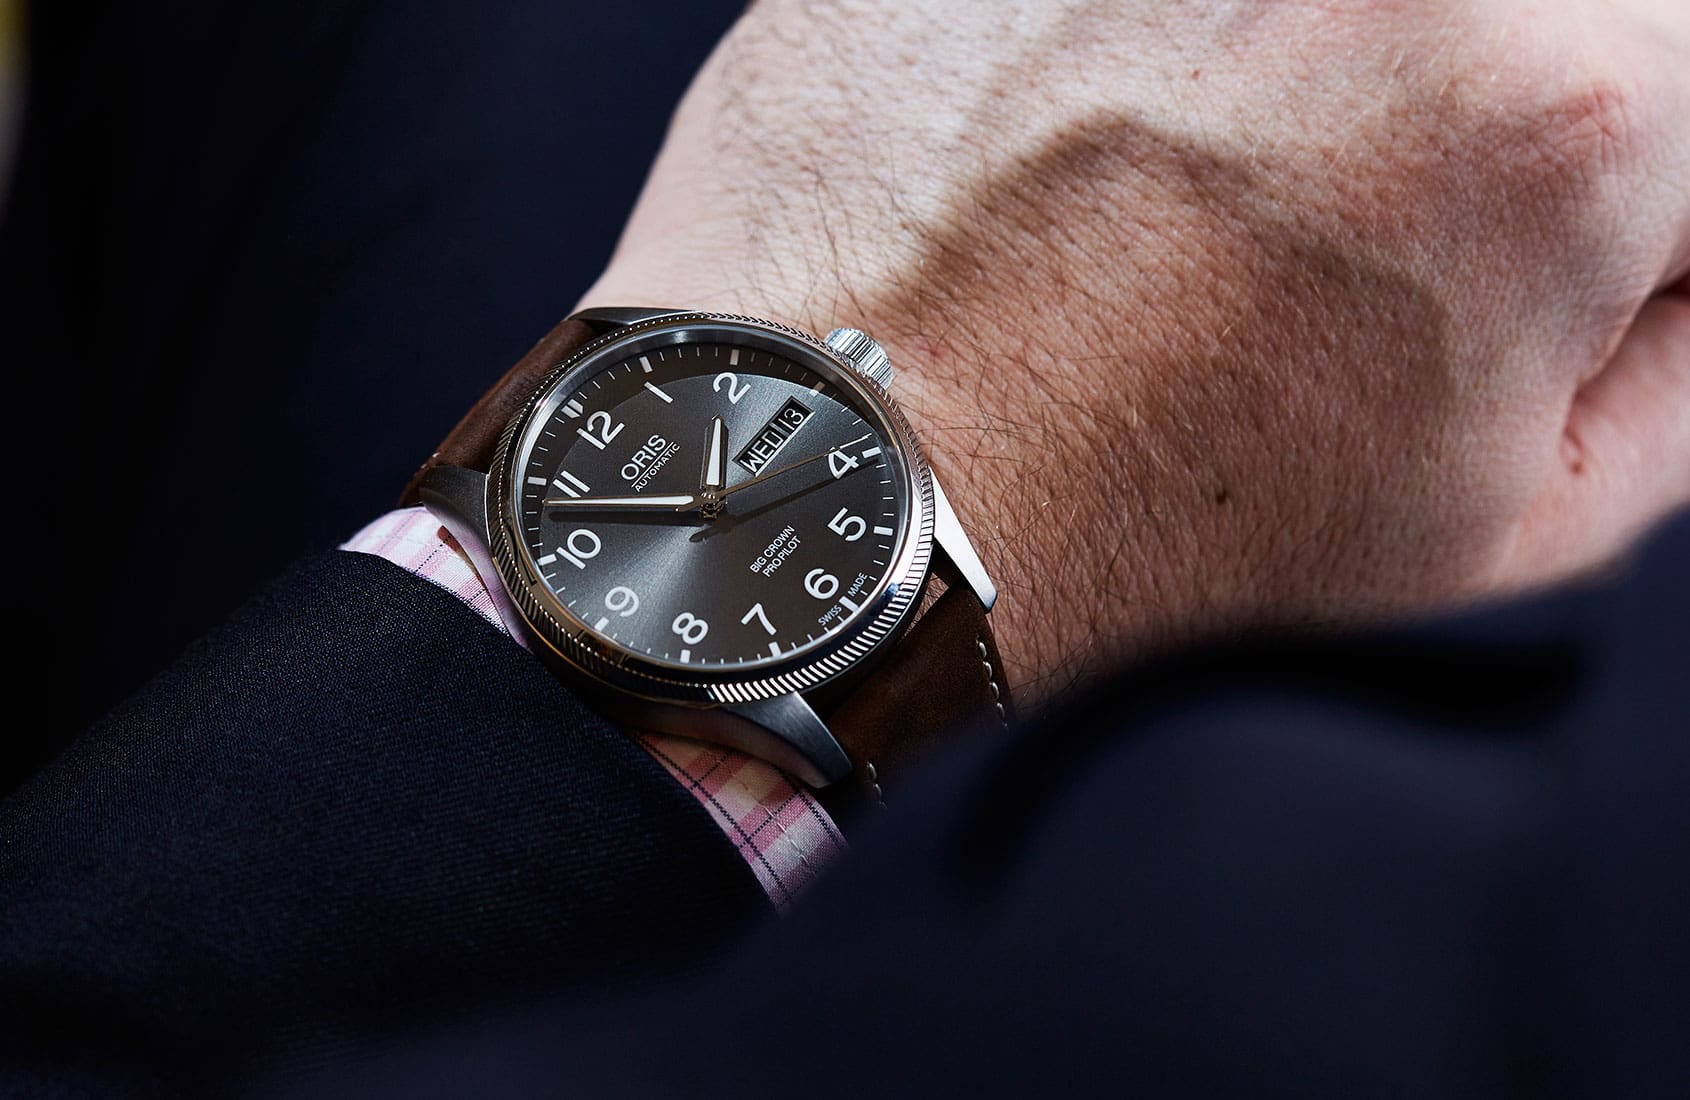 Oris Pro-Pilot Big Crown Day Date – Hands-on Review